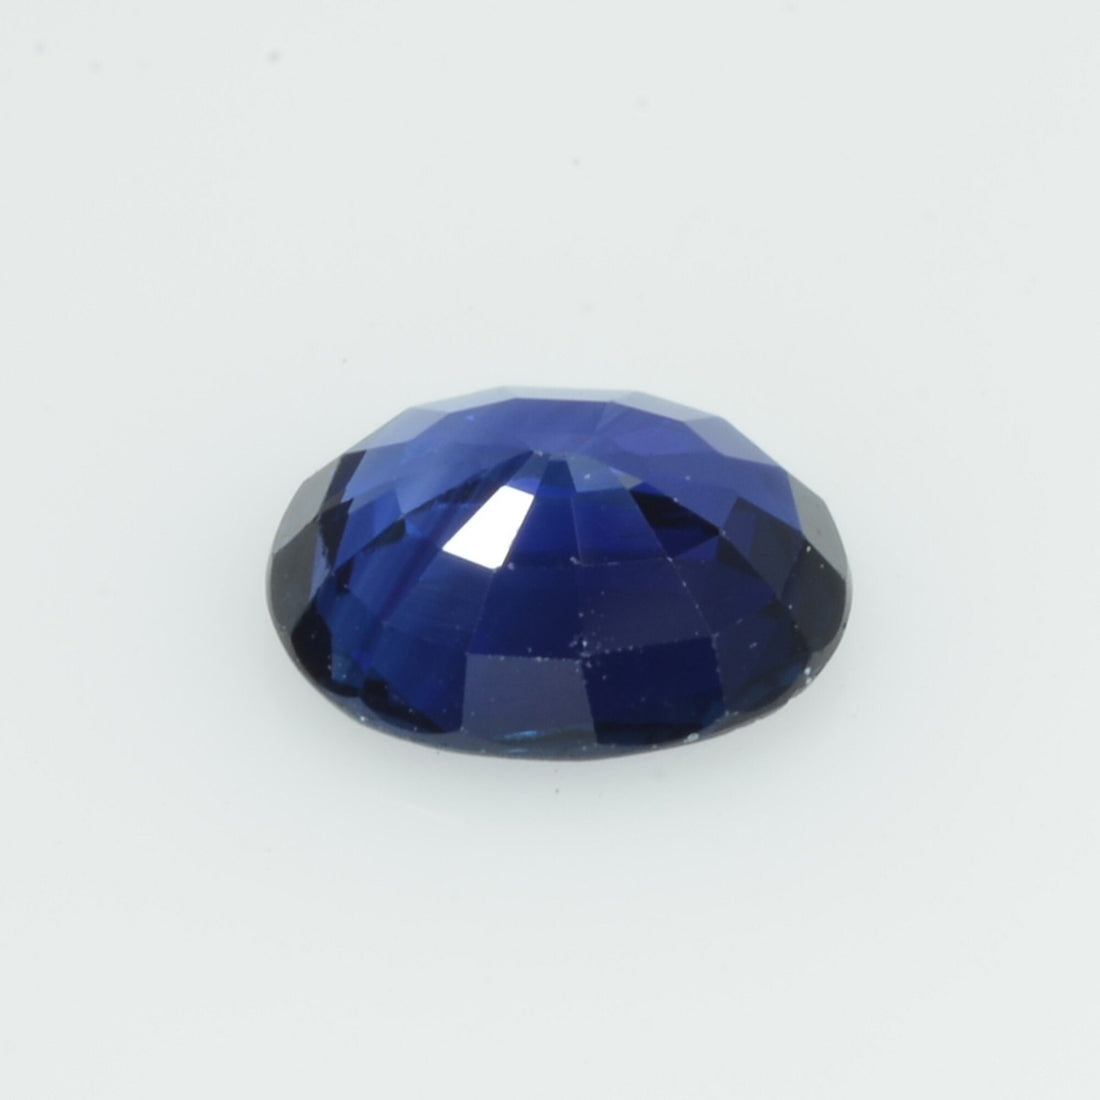 0.99 cts Natural Blue Sapphire Loose Gemstone Oval Cut